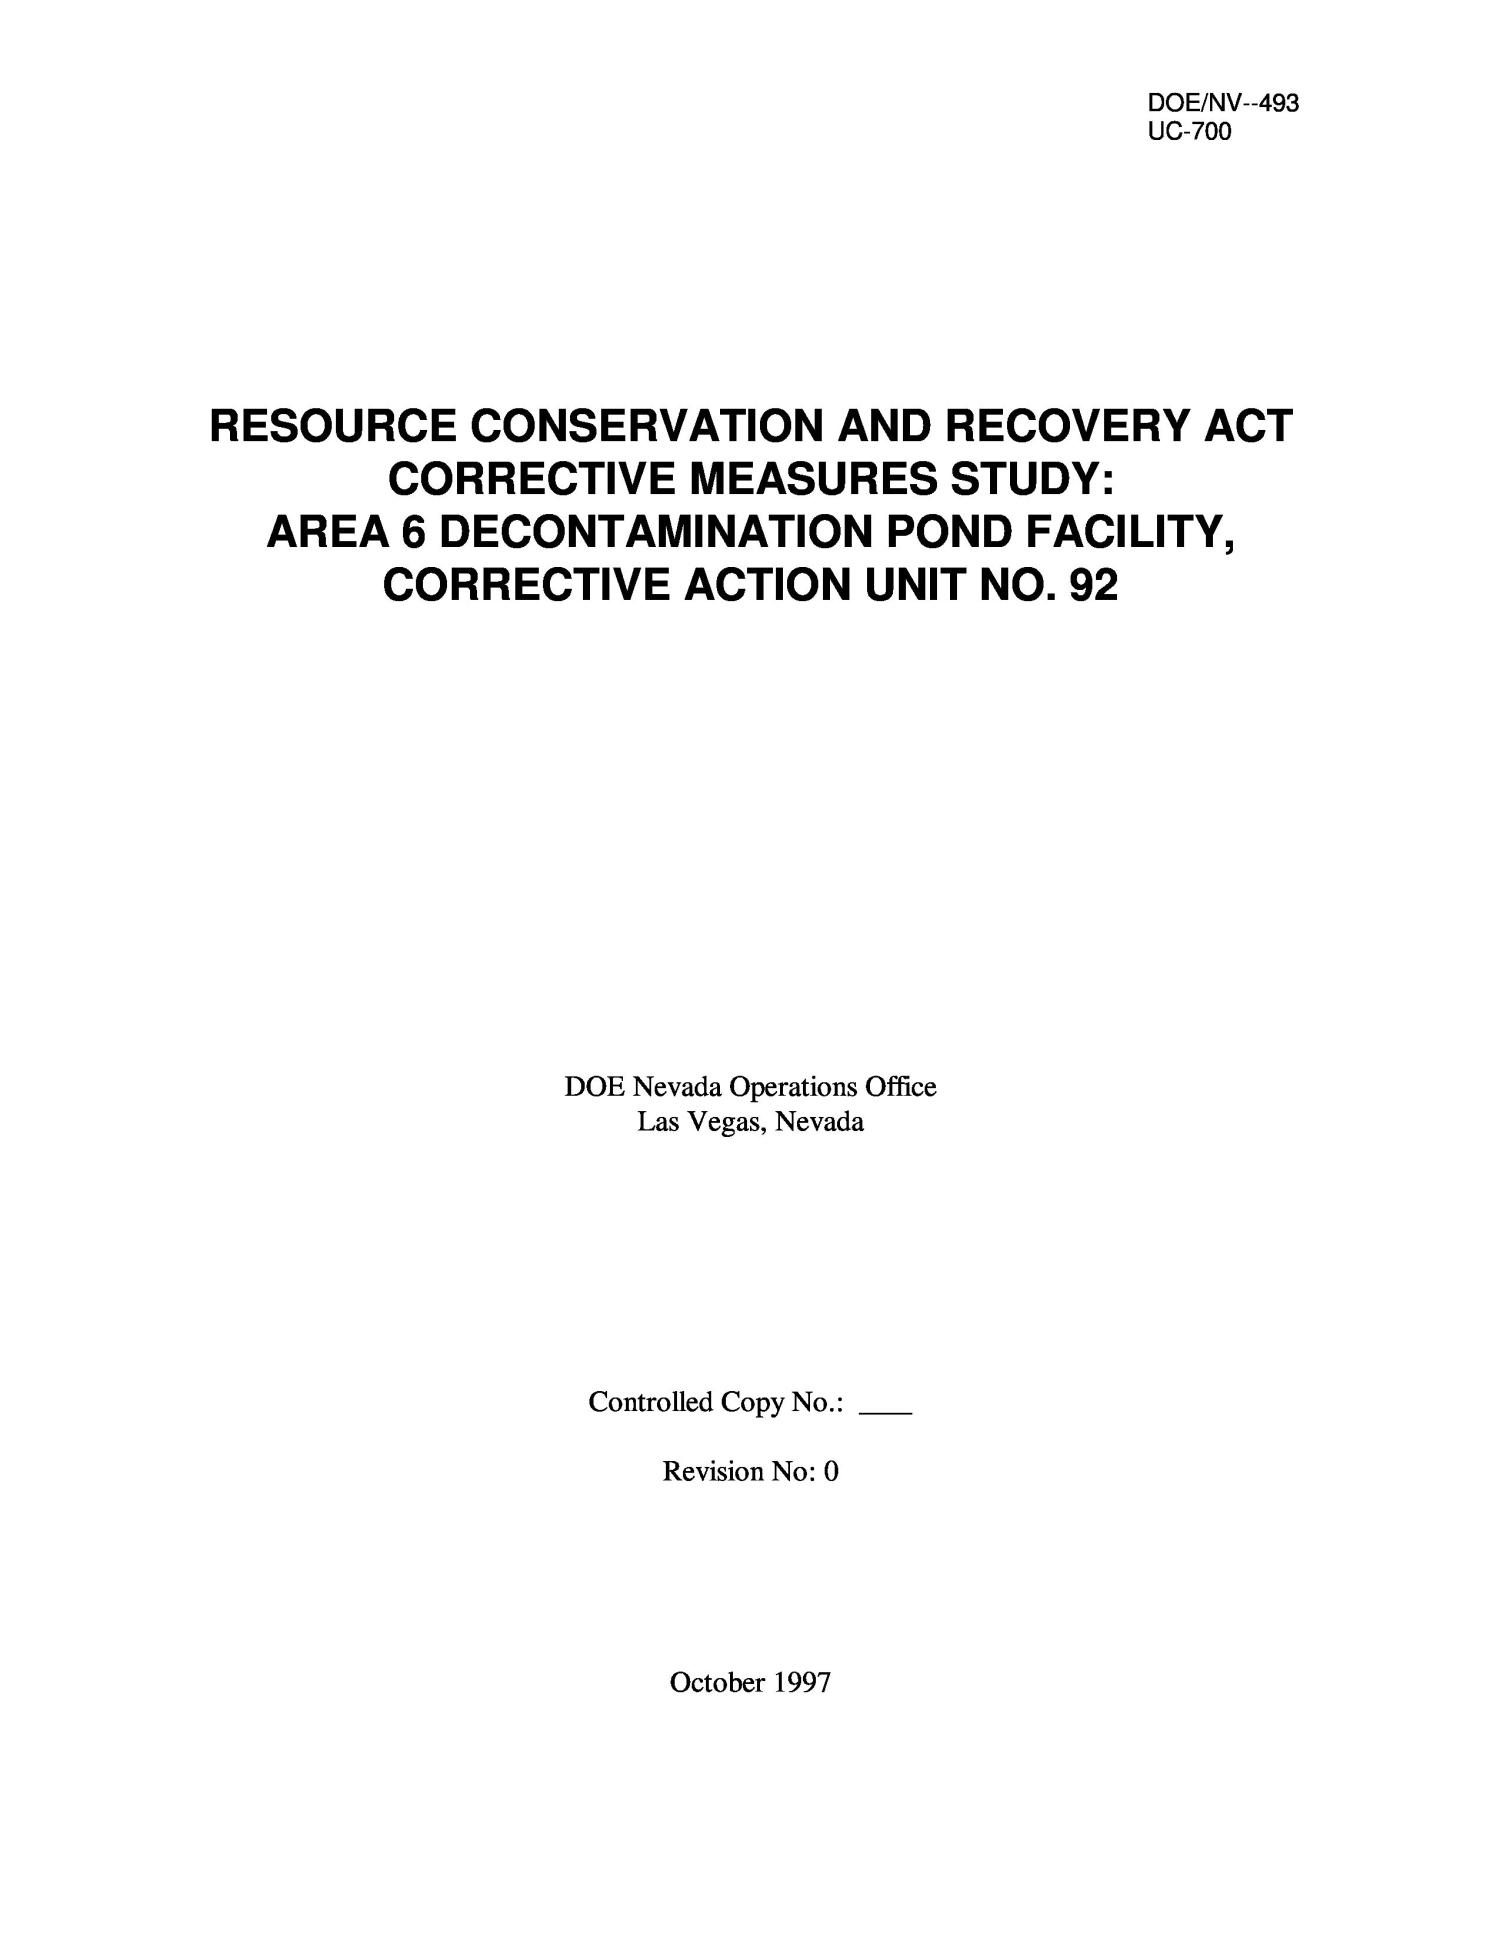 Resource Conservation and Recovery Act corrective measures study: Area 6 decontamination pond facility, corrective action unit no. 92
                                                
                                                    [Sequence #]: 2 of 179
                                                